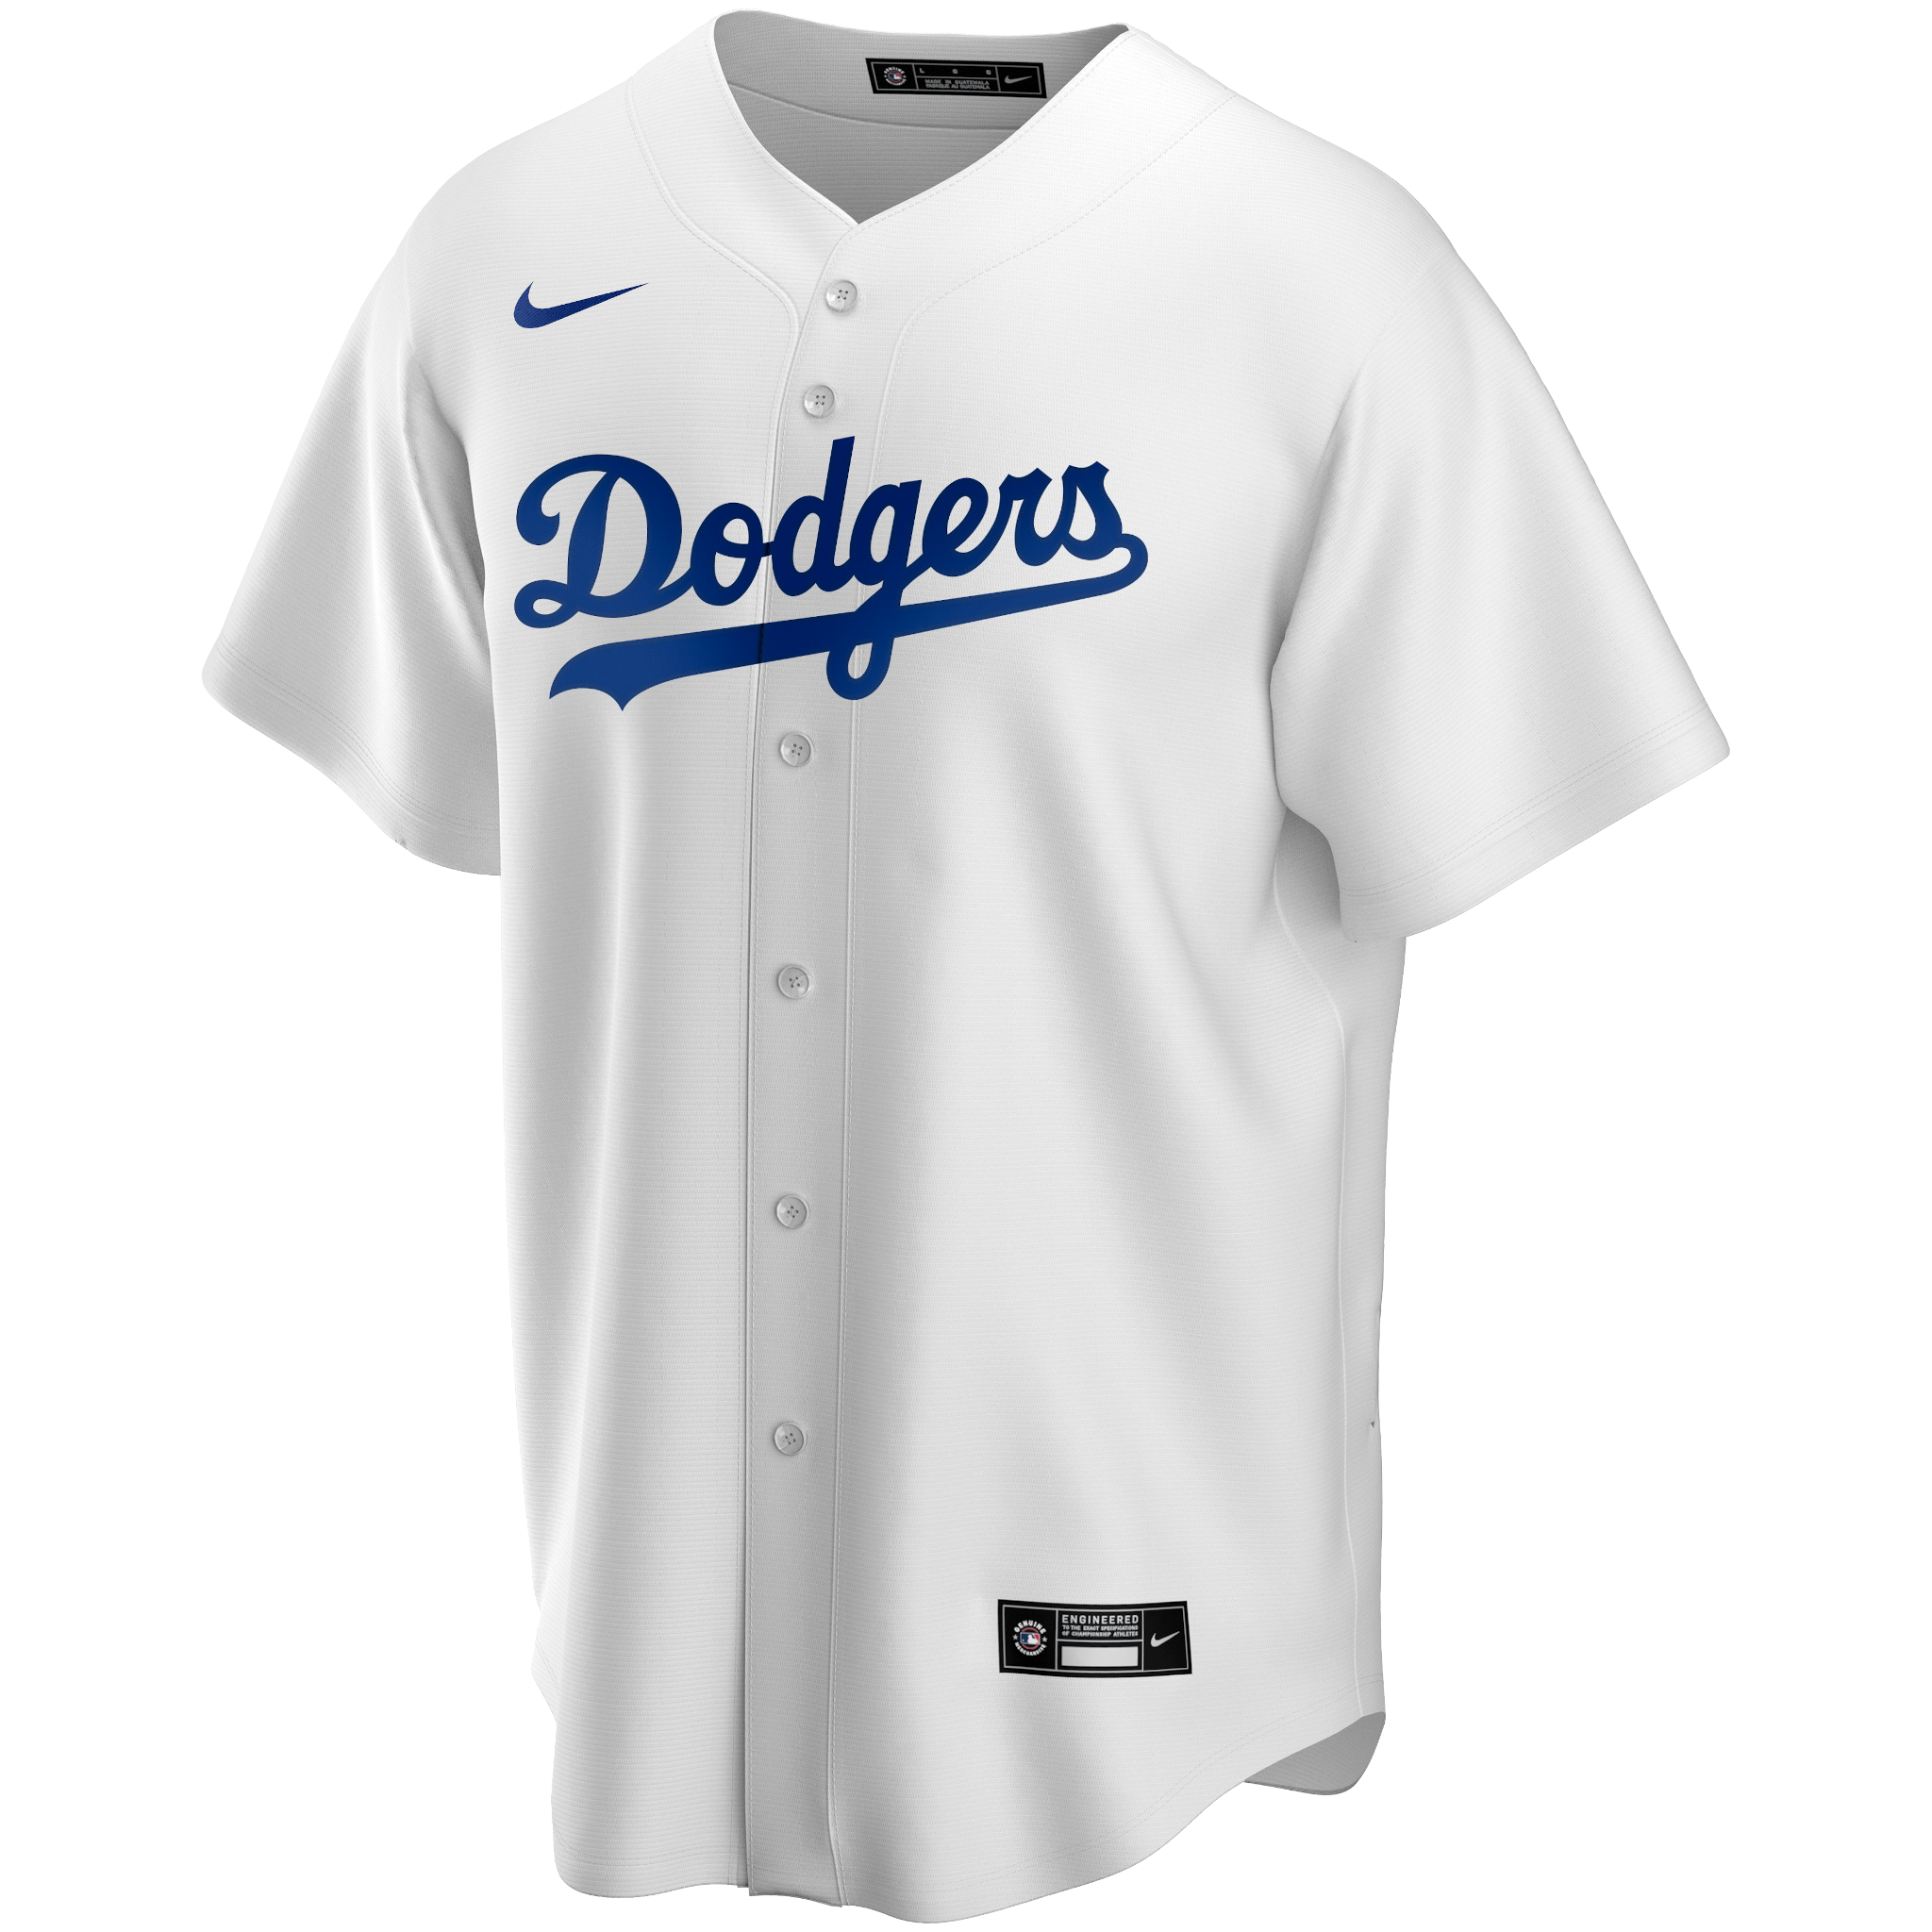 Nike Chris Taylor Youth Jersey - Dodgers Kids Home Jersey